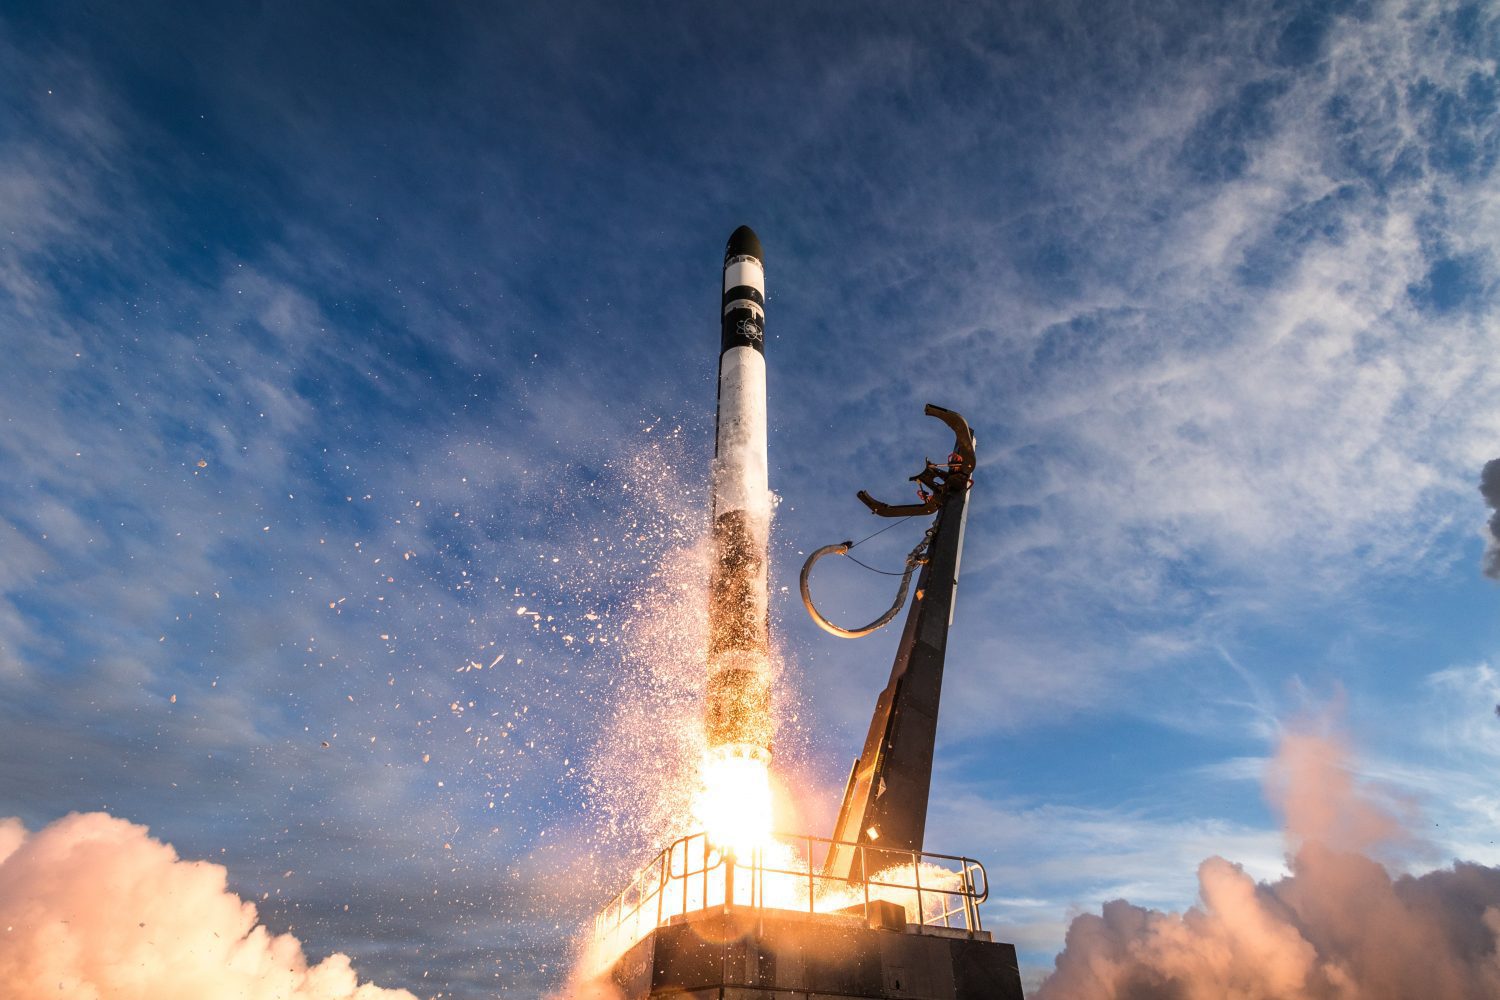 NASA Sends CubeSats to Space on First Dedicated Launch with U.S. Partner Rocket Lab